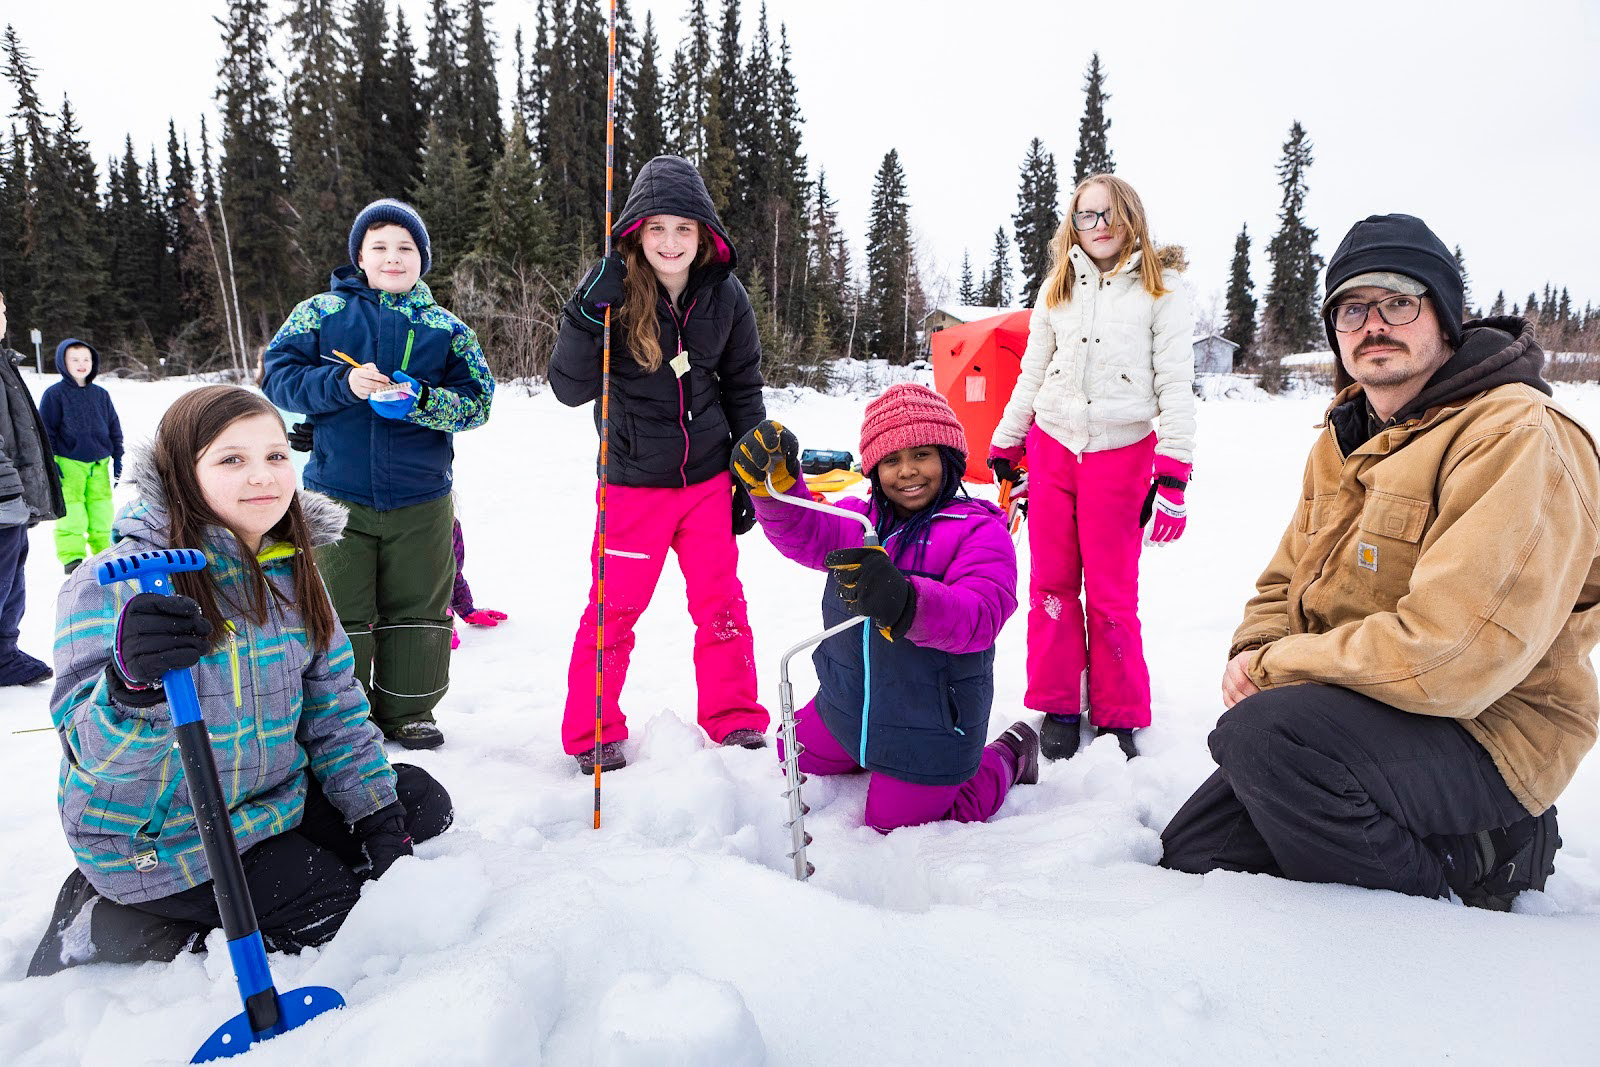 An adult and a group of children in colorful clothing drill a hole in the snow and ice.